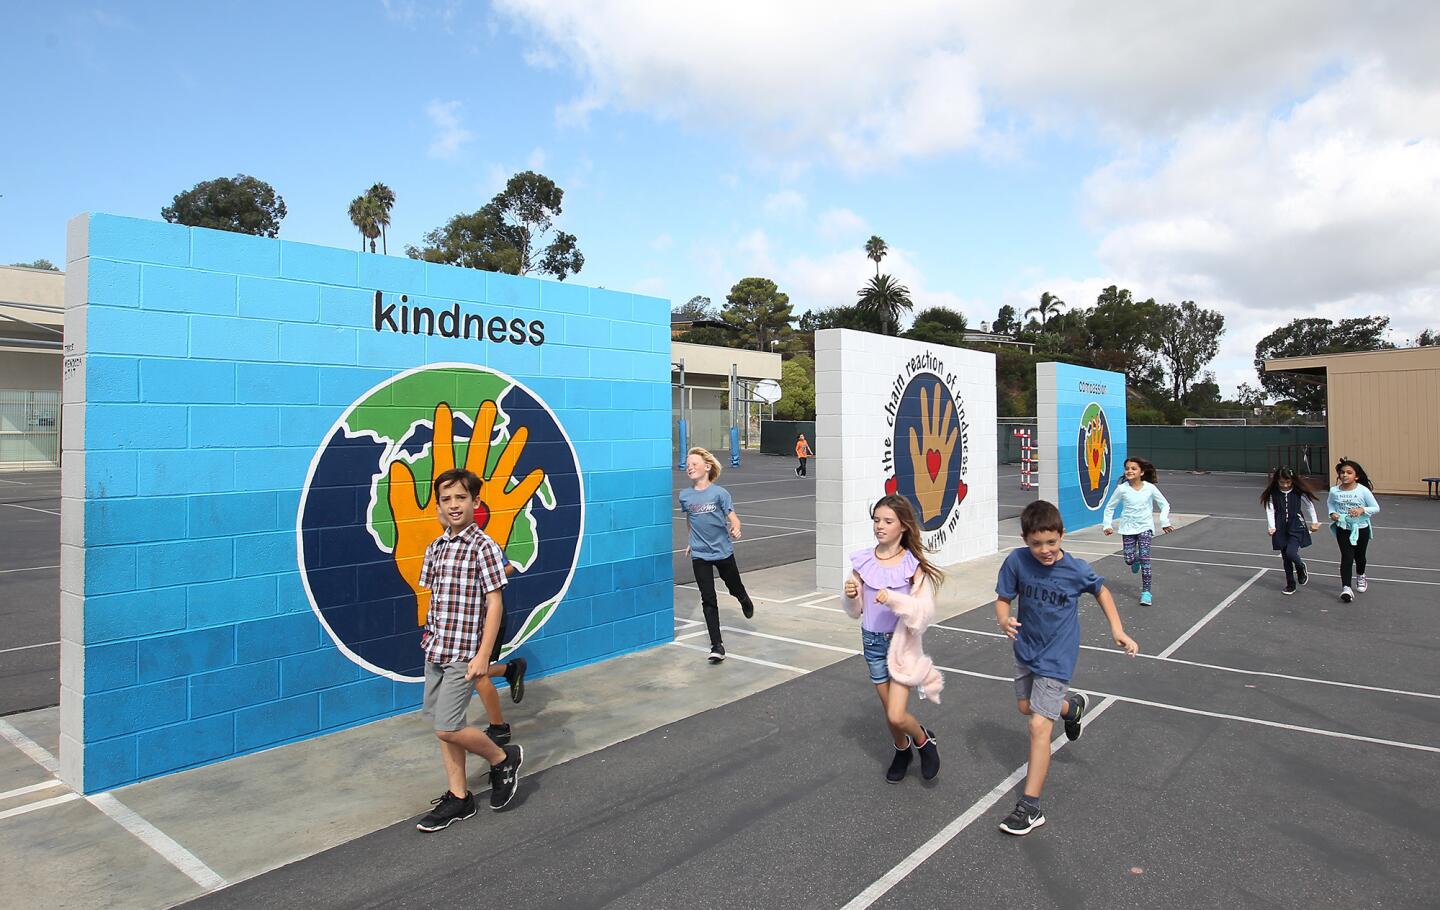 Colorful handball courts now adorn the playground at Top of the World Elementary school in Laguna Beach. The school opened in 1967.